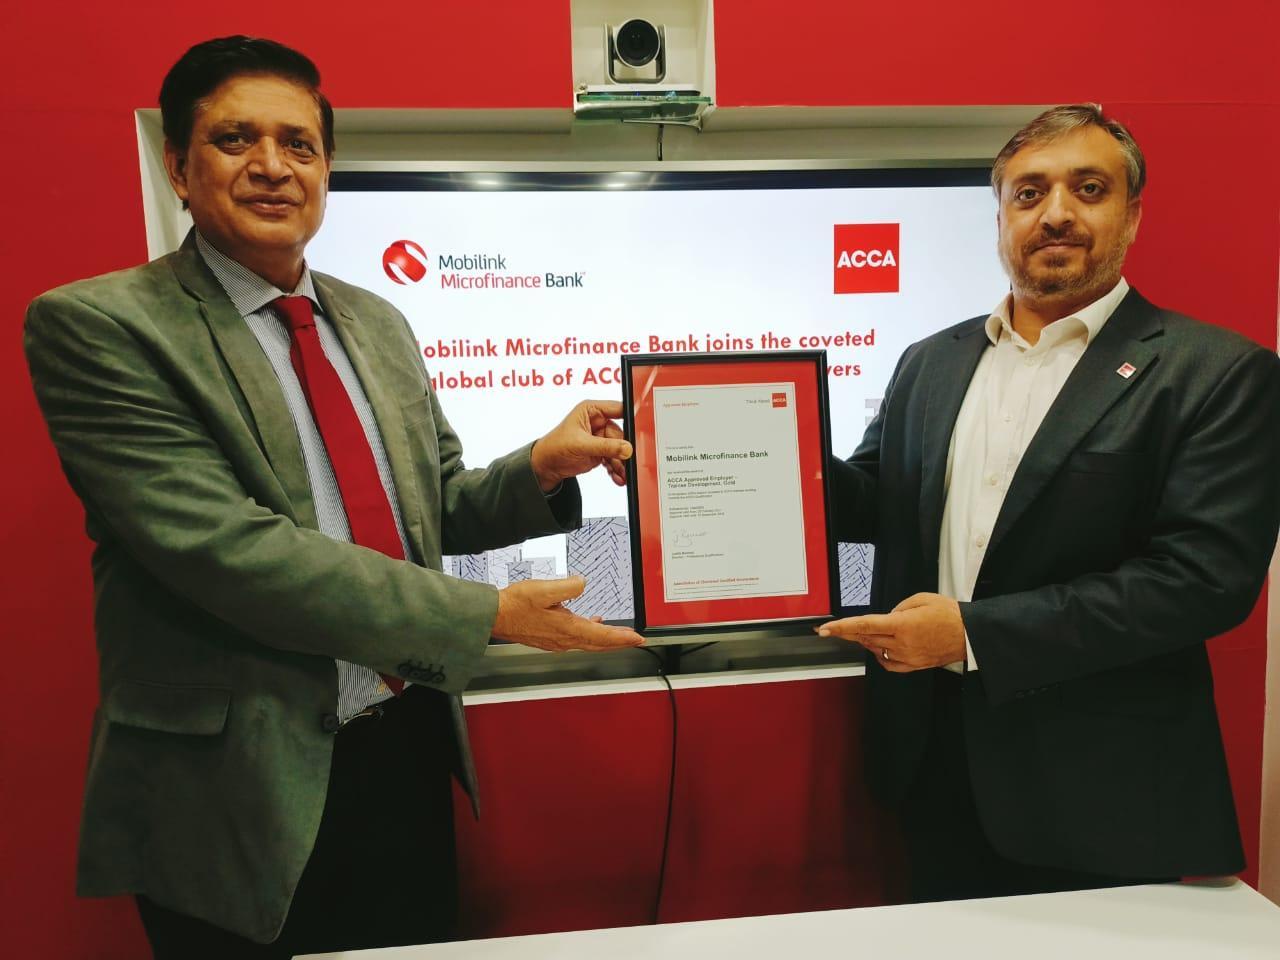 Mobilink Microfinance Bank joins the coveted global club of ACCA Approved Employers